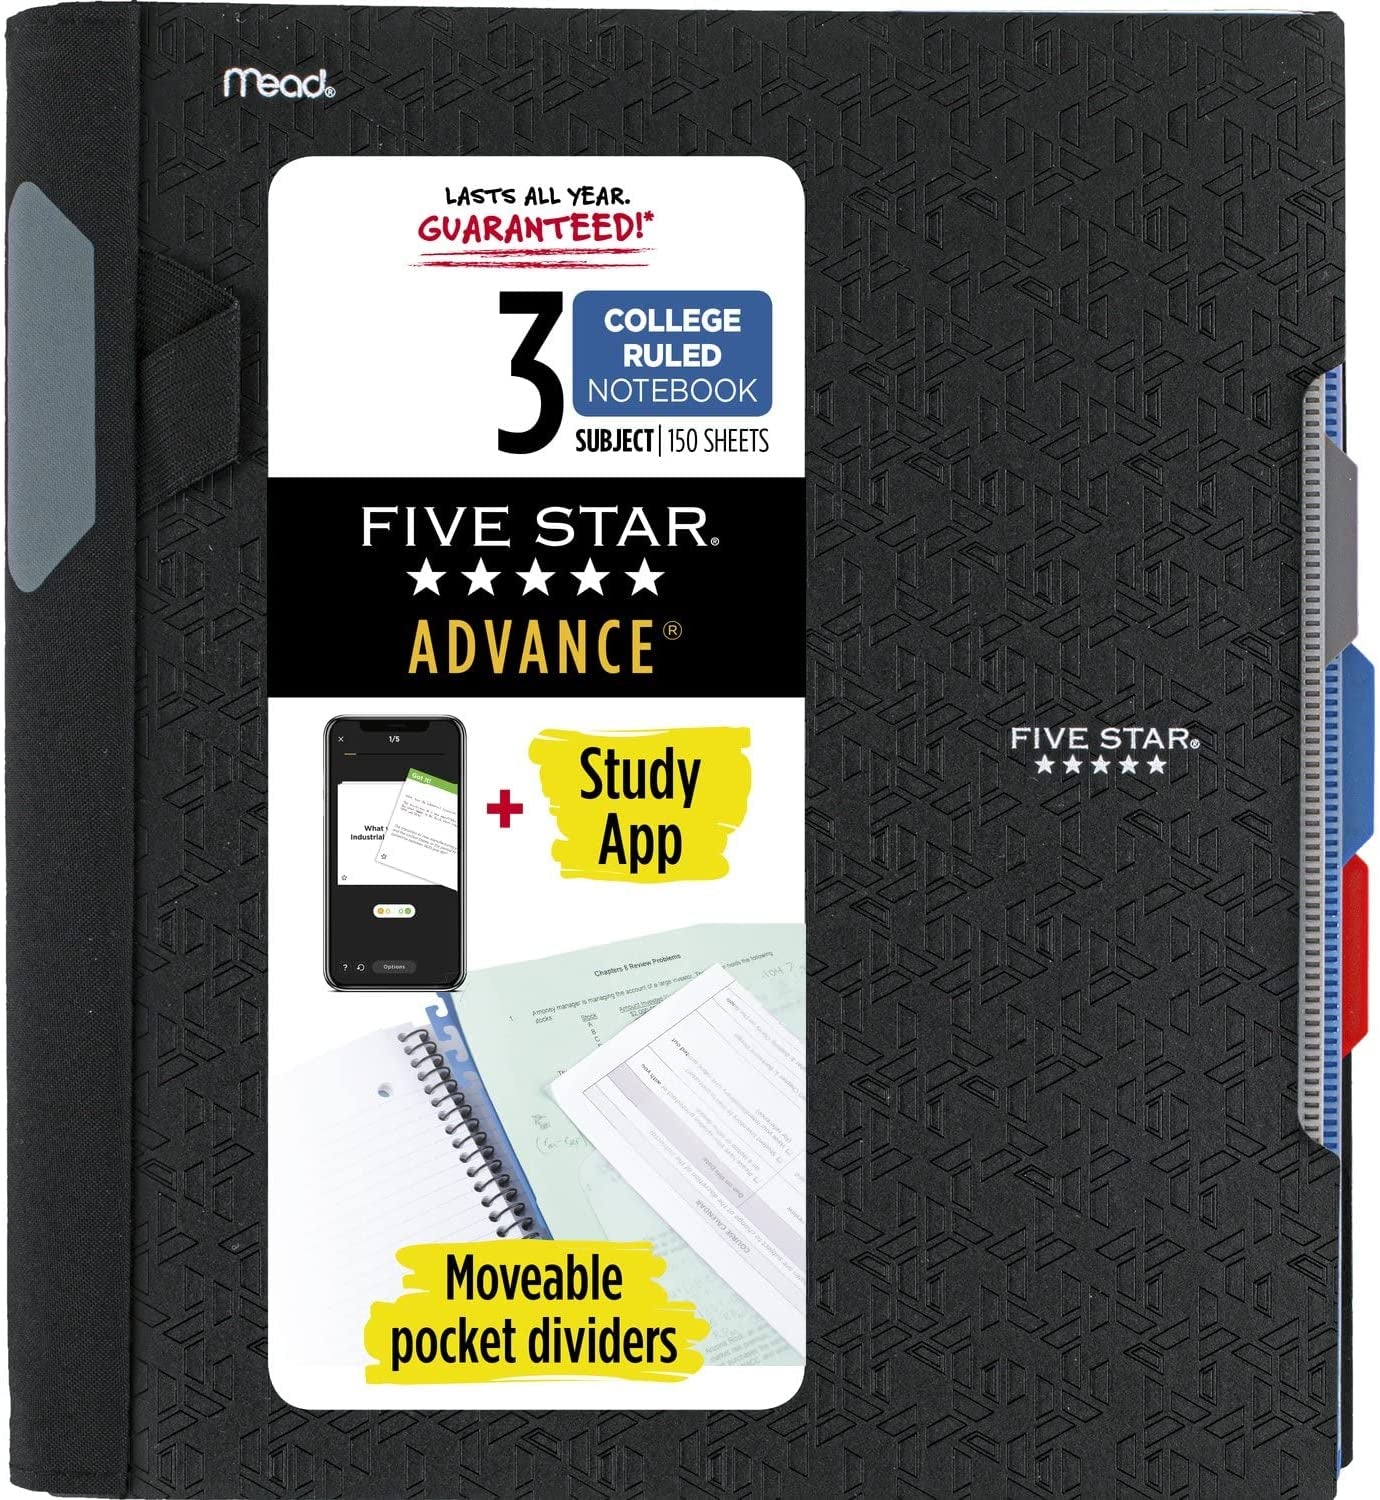 Advance Spiral Notebook + Study App, 3 Subject, College Ruled Paper, 8-1/2" X 11", 150 Sheets, Spiral Guard, Movable Tabbed Dividers and Pockets, Blue (73138)